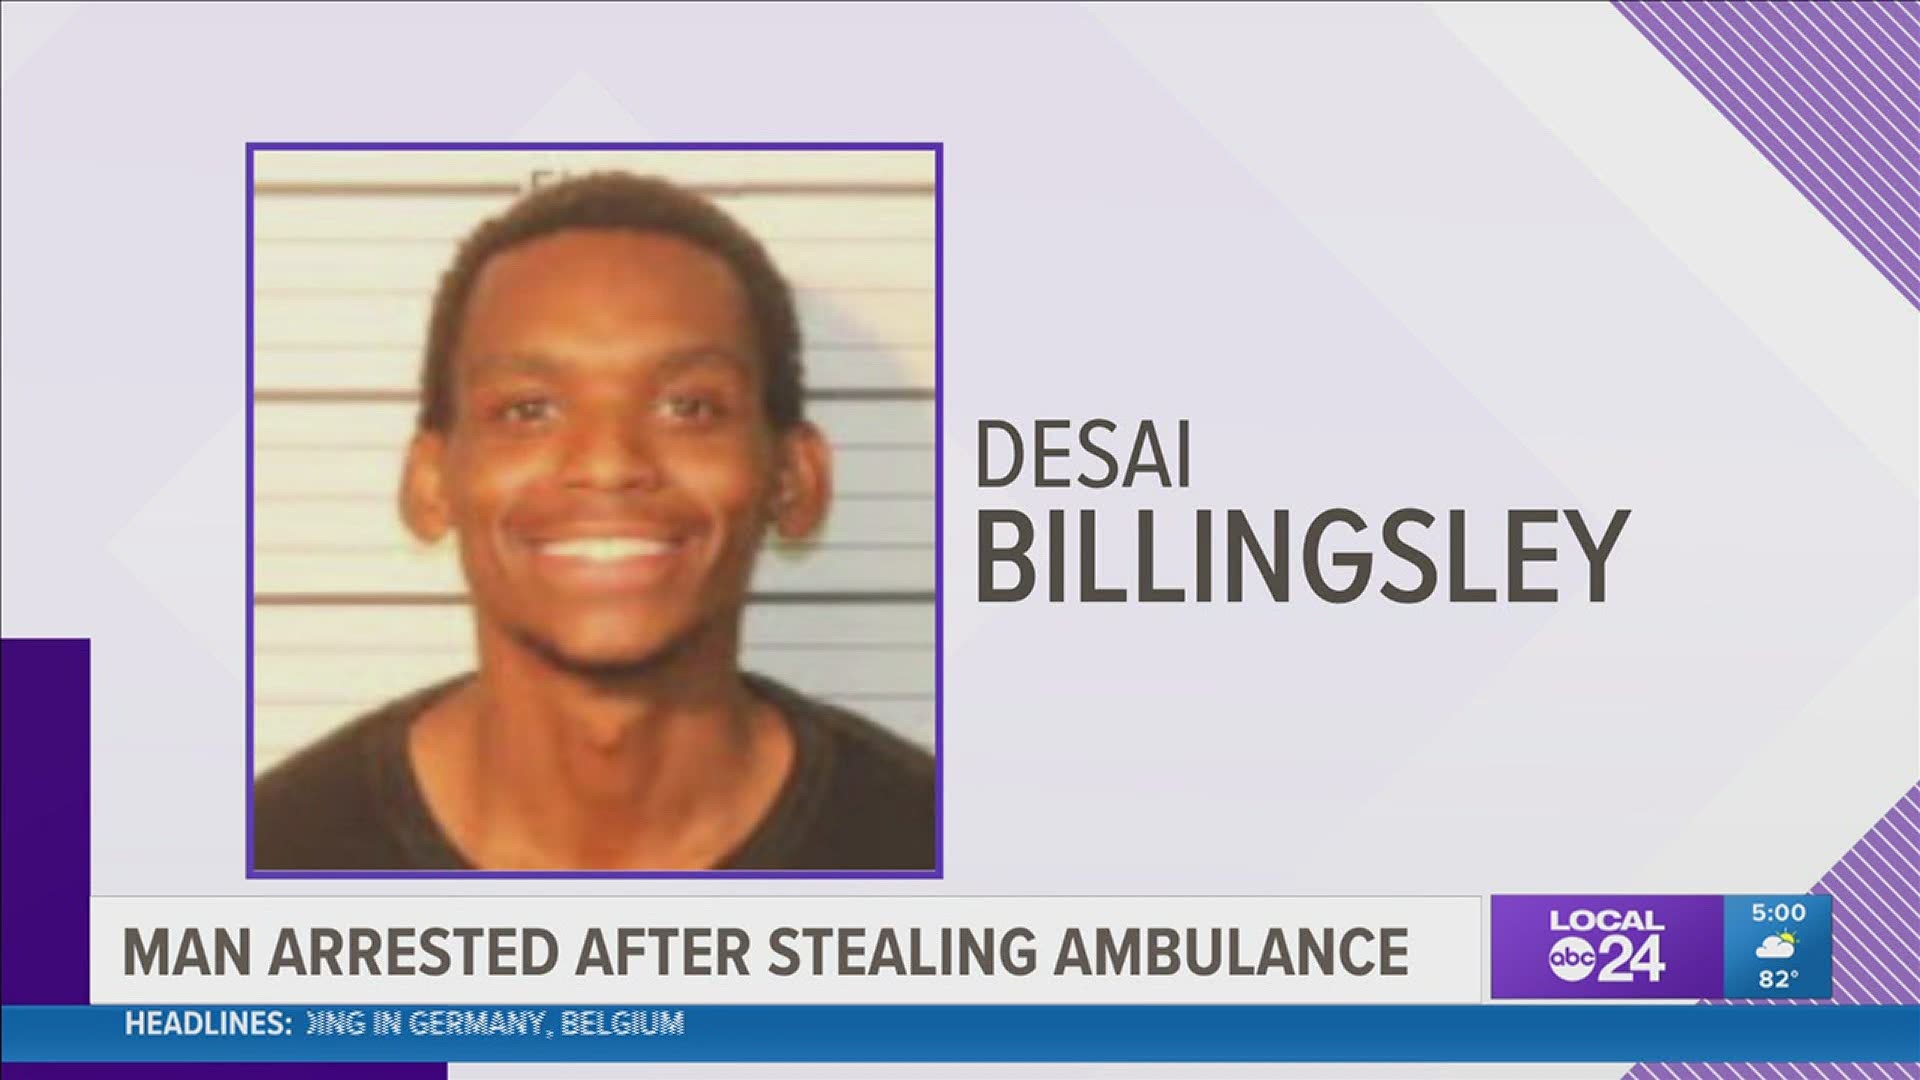 Memphis Police said 23-year-old Desai Billingsley was tracked down after a video was posted on YouTube showing him abandoning the stolen ambulance.